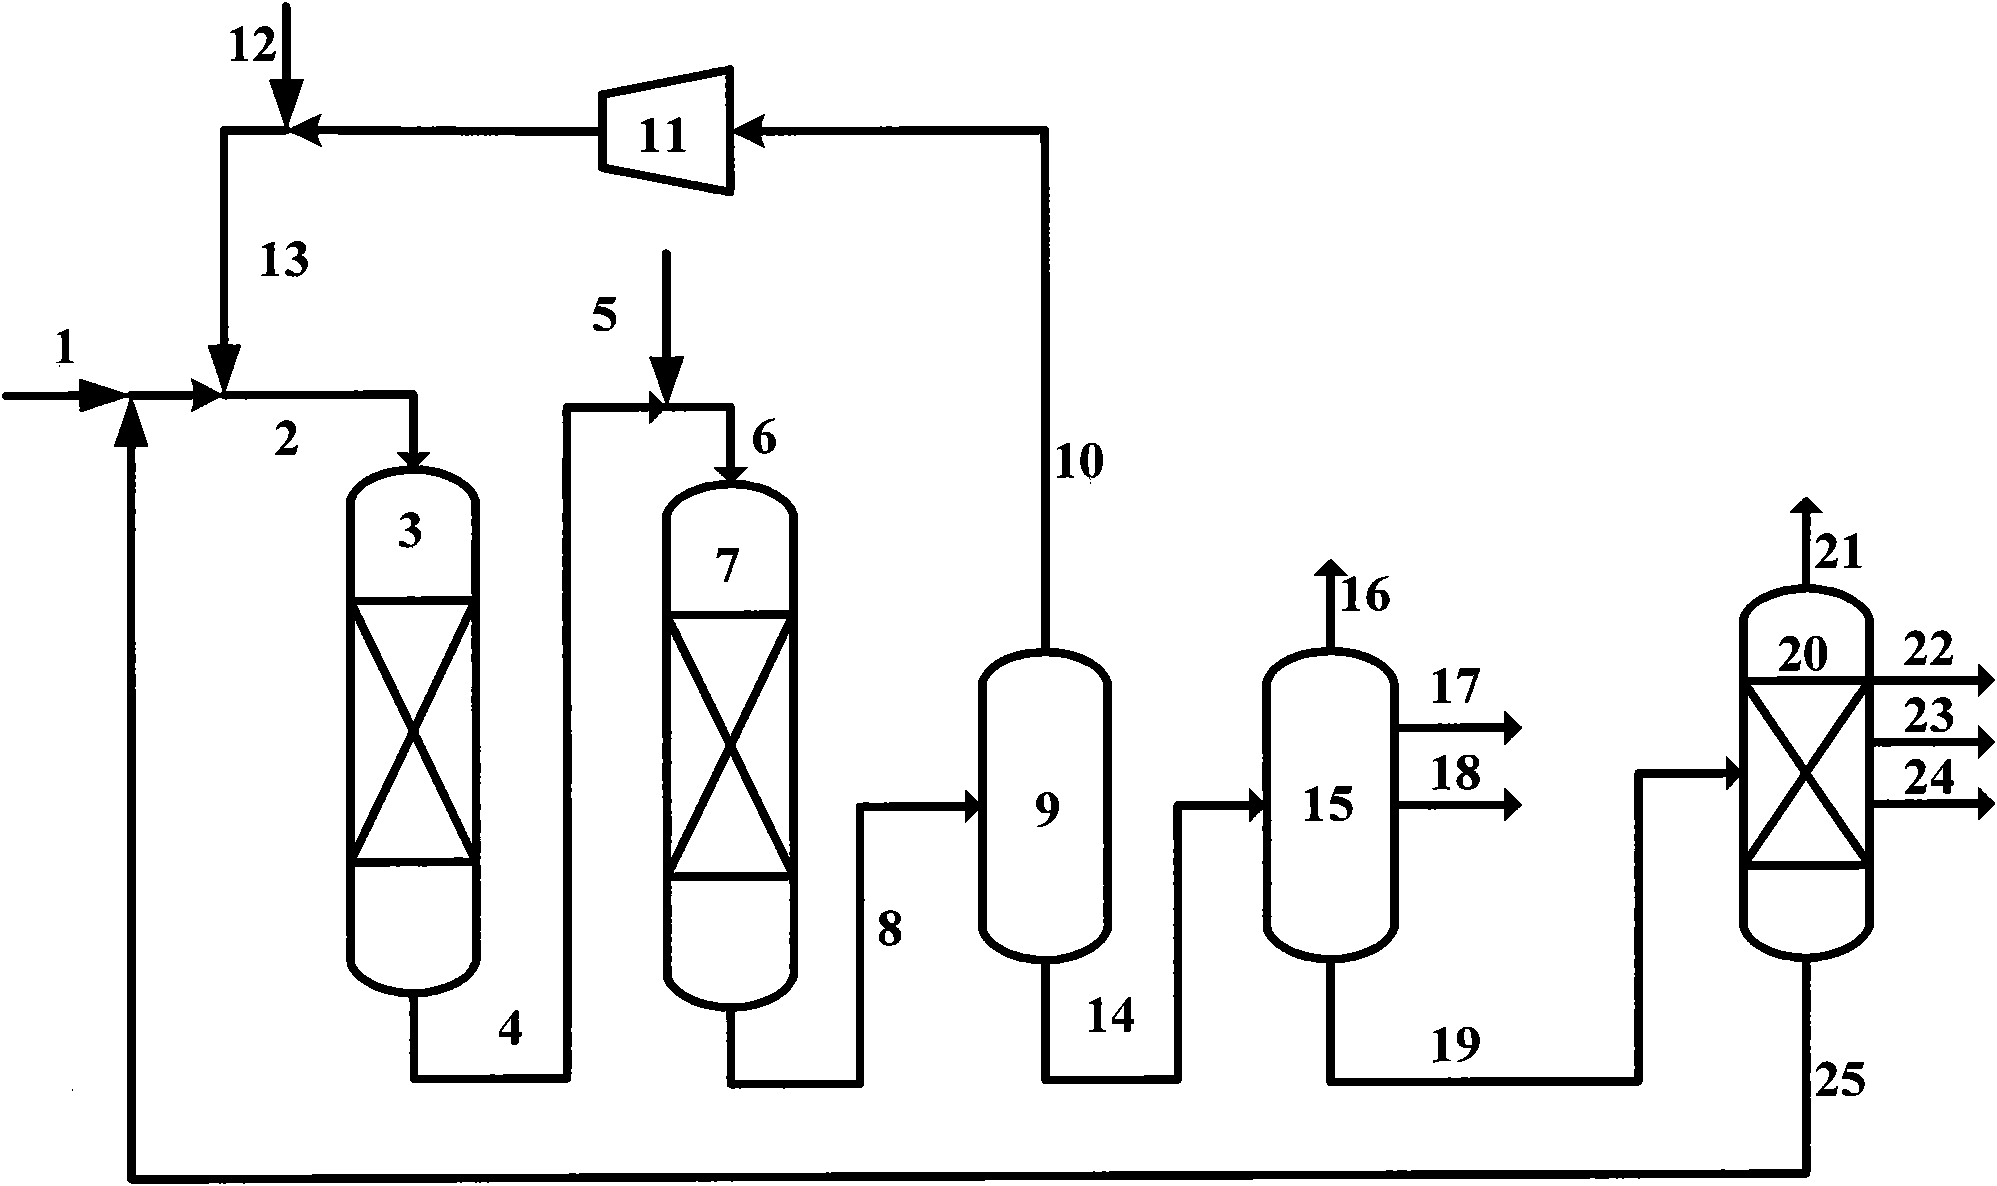 Method using gas oil and residual oil to process light fuel